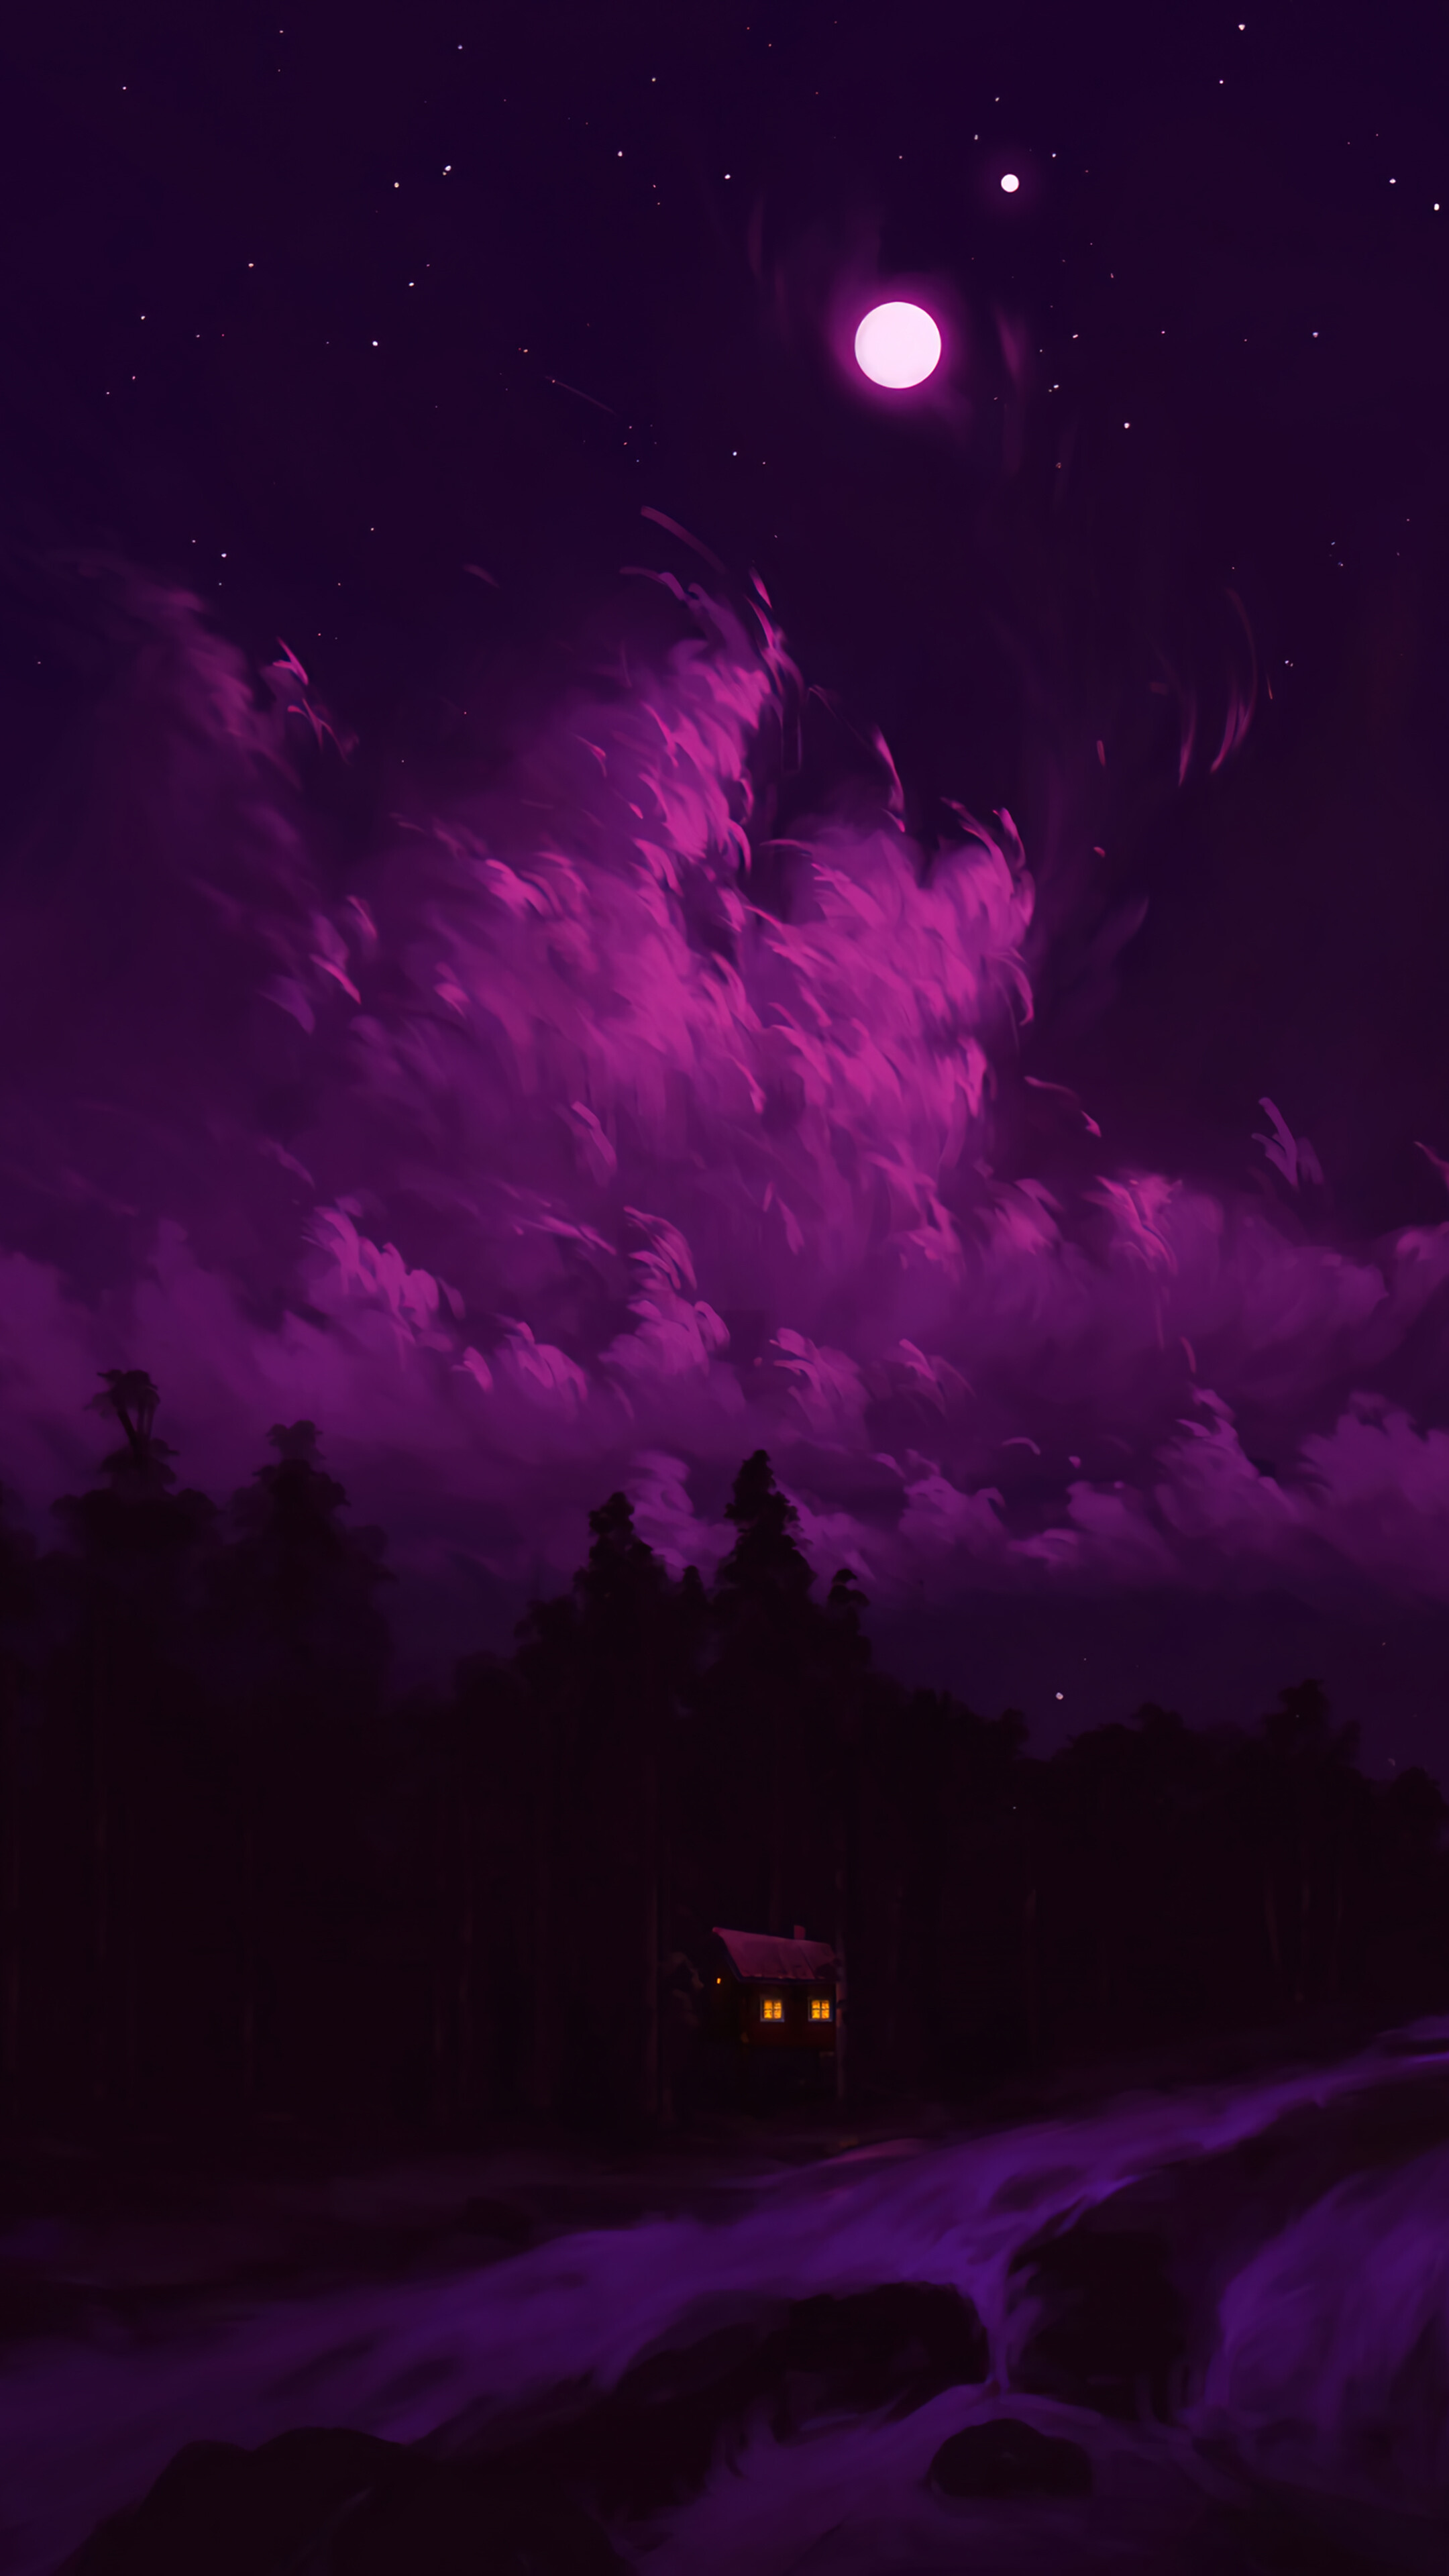 [20+] Night Sky with Clouds Wallpapers | WallpaperSafari